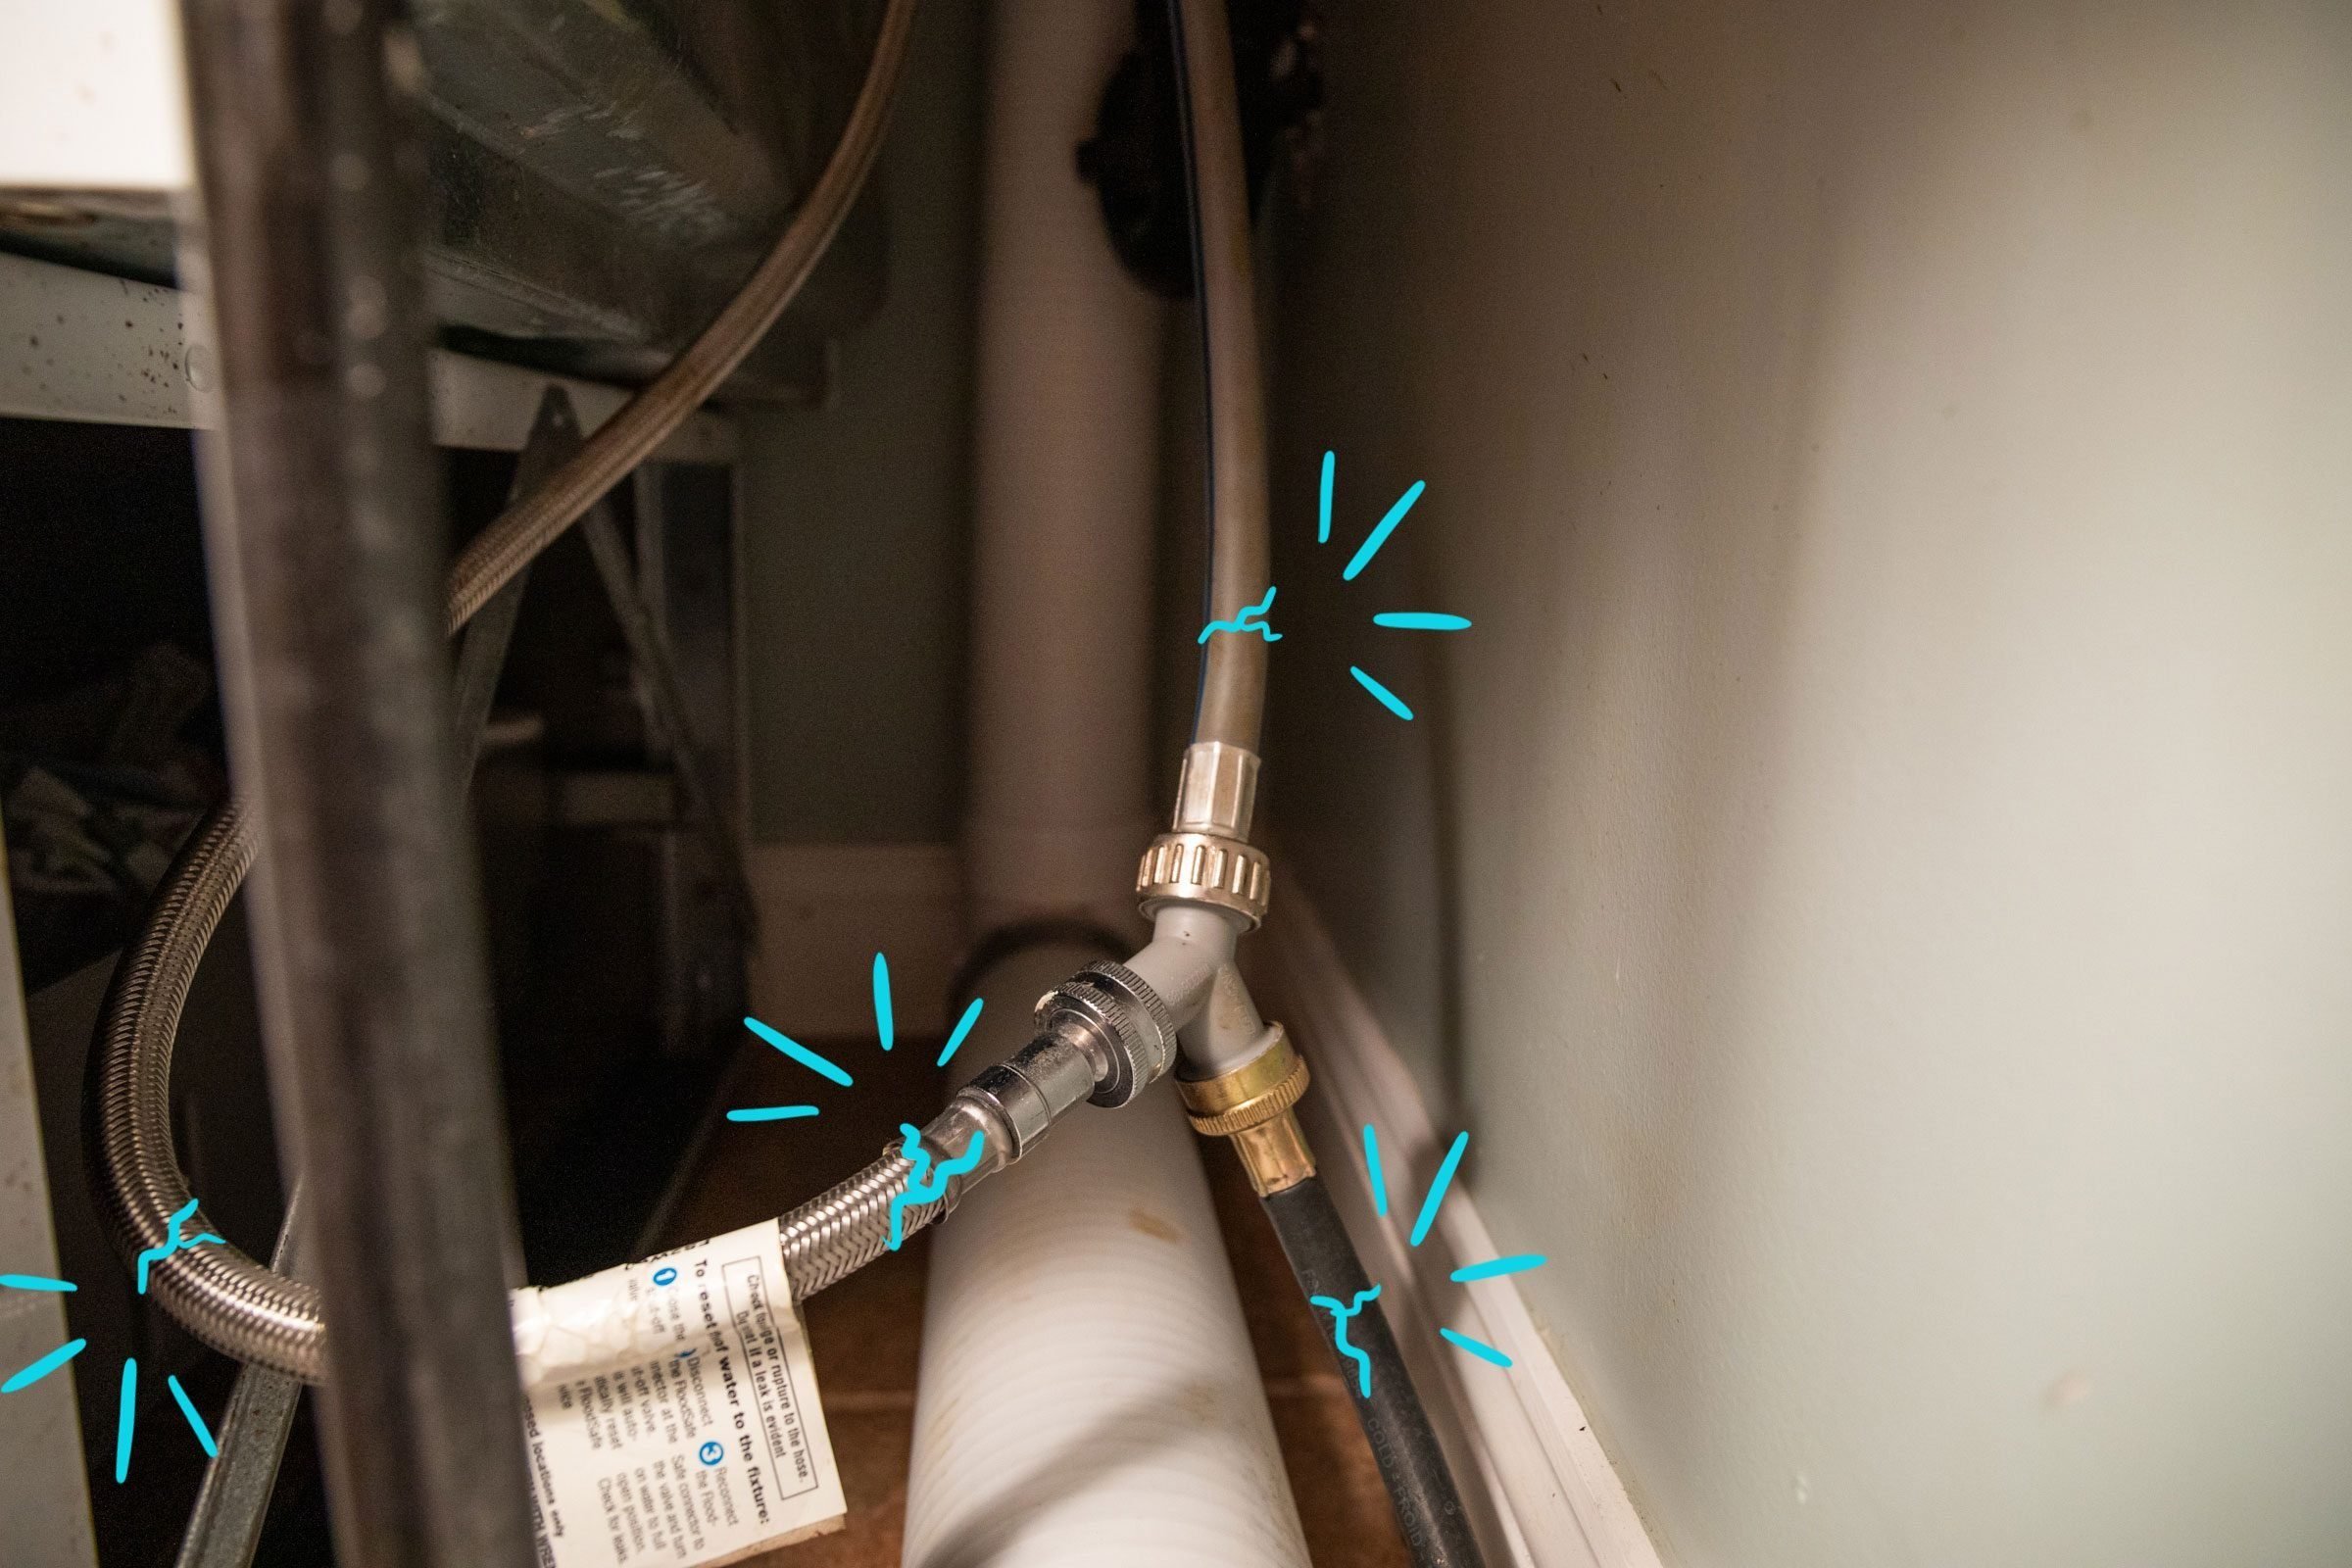 Low water flow or water flow issues